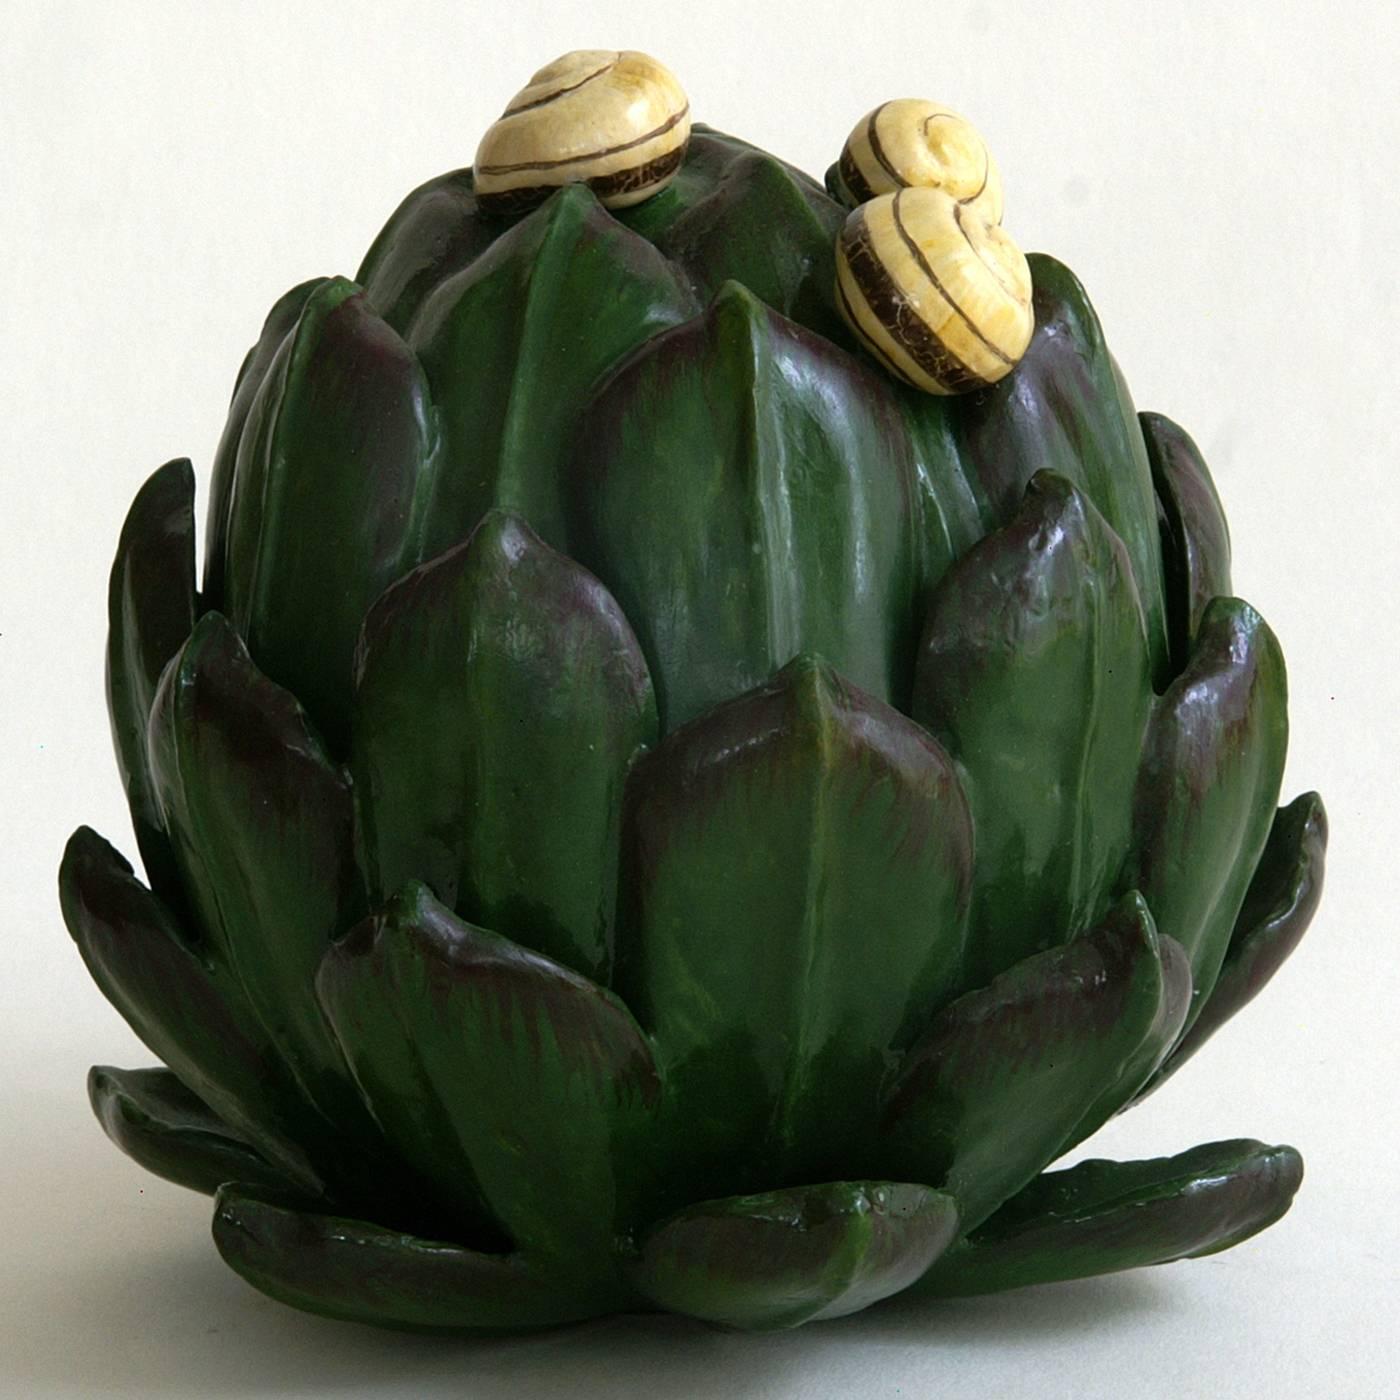 This exquisitely crafted papier-maché sculpture depicts an artichoke with small snails on the tips of its leaves. The artichoke is hand-painted with natural pigments in lifelike colors, and then lacquered giving its exterior a glossy finish. The